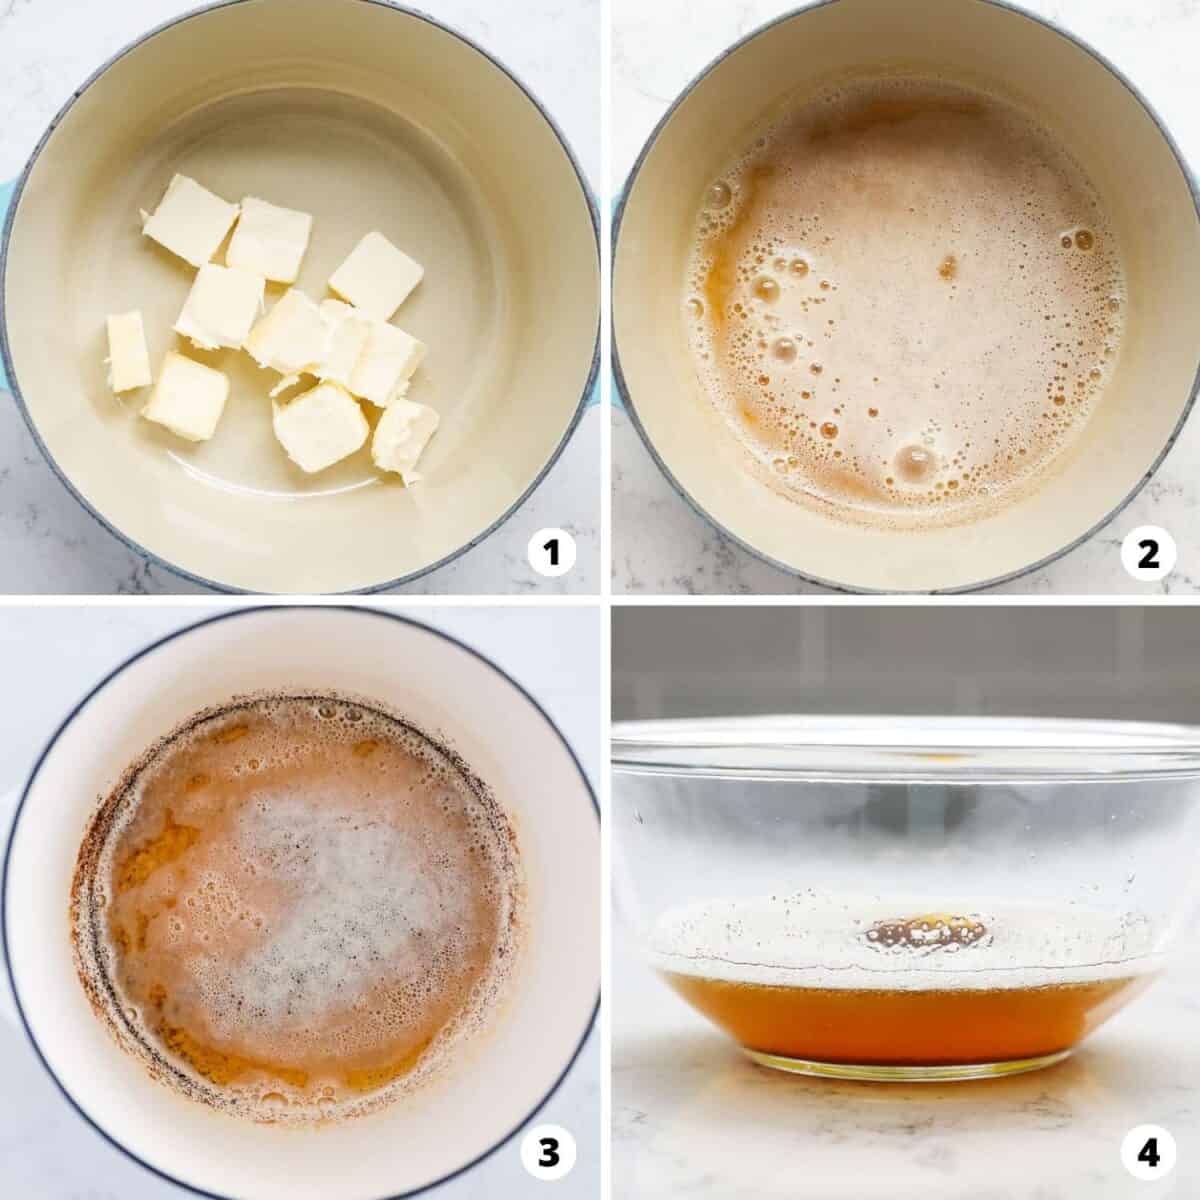 Showing how to brown butter in a 4 step collage.